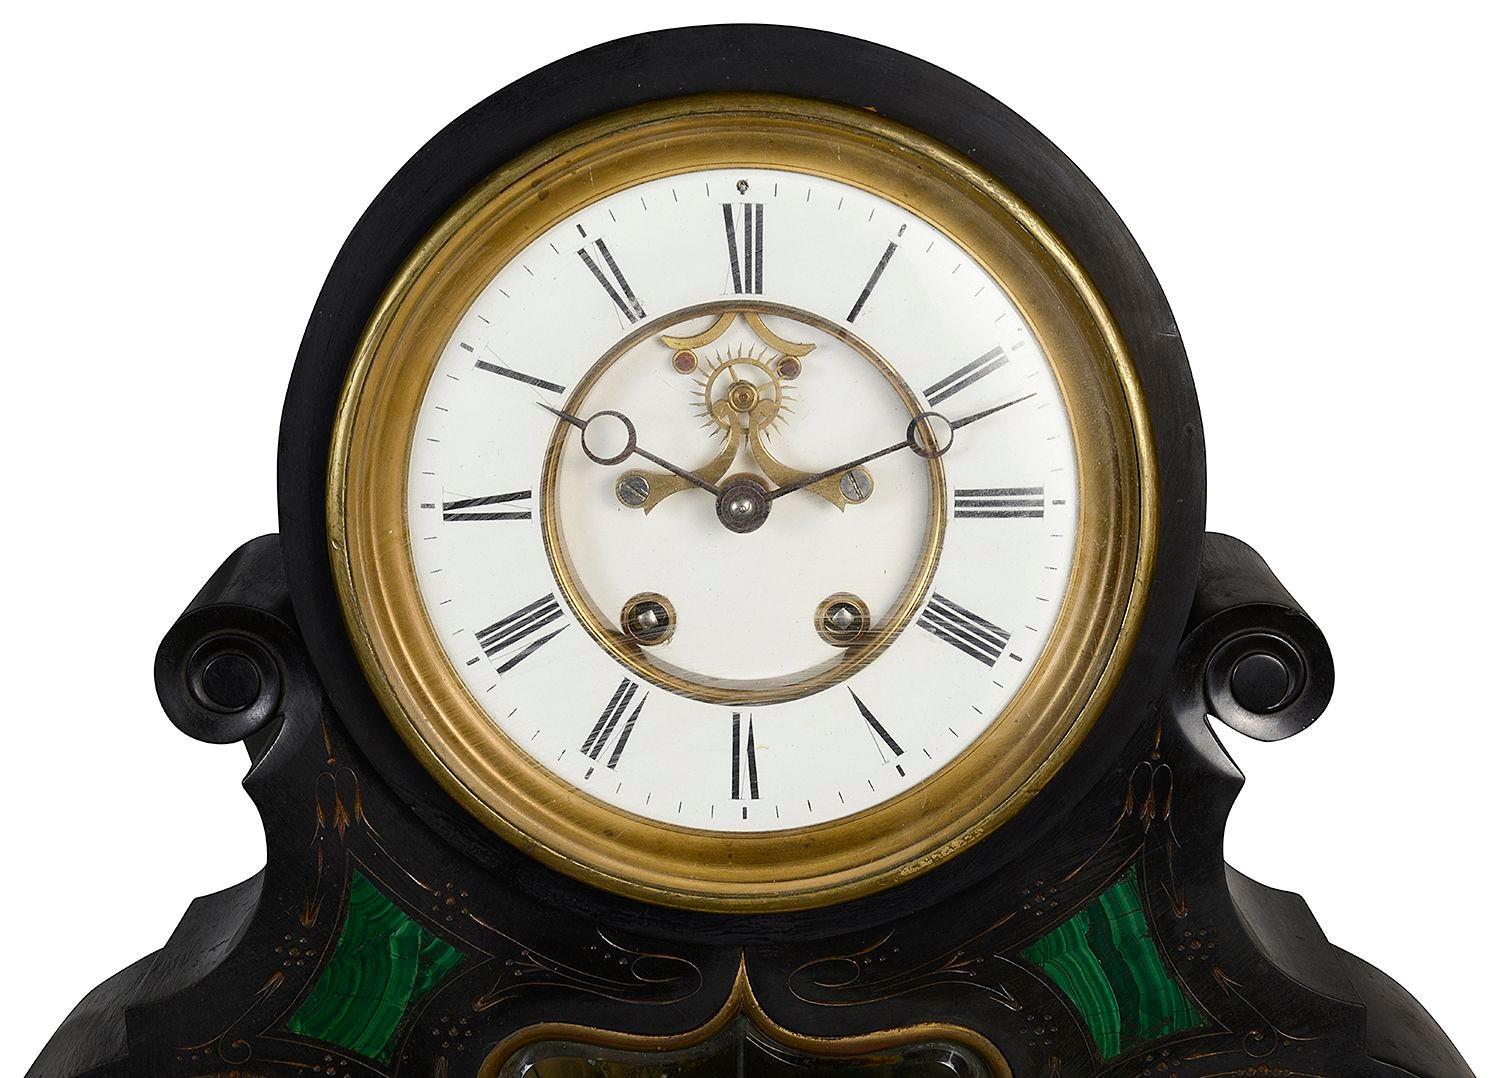 A very impressive late 19th Century Belgium black marble mantle clock, having white enamel dials to the eight day duration clock, with roman numerals, striking on the hour and half hour. Two further dials, one with a calendar and moon phase. The